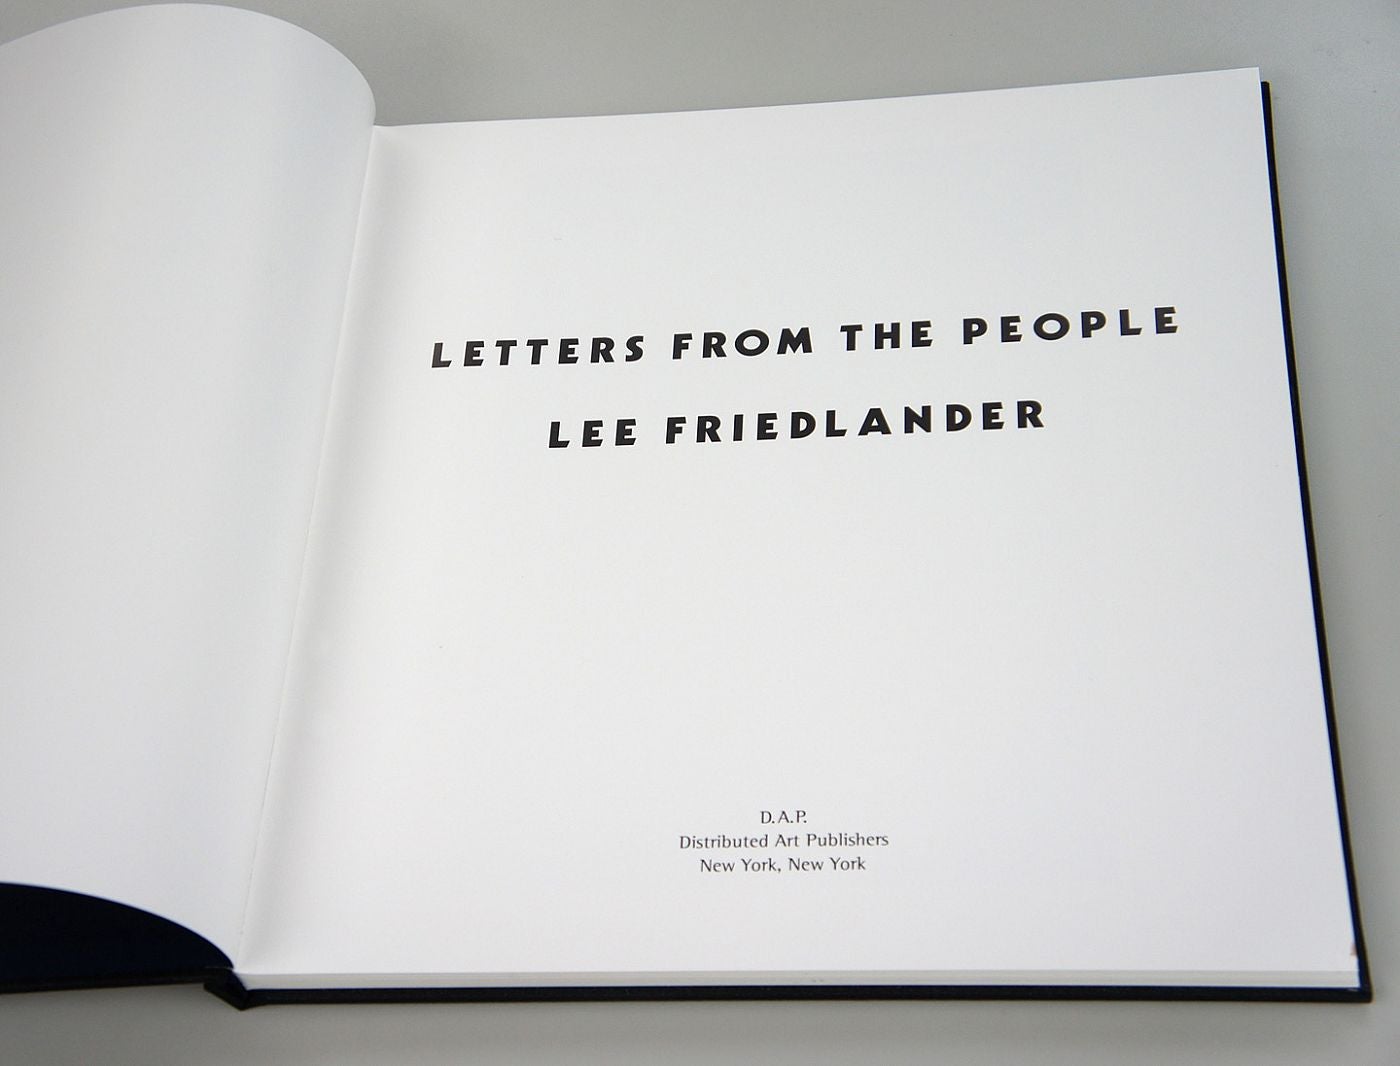 Lee Friedlander: Letters from the People (Special Limited Edition with One Vintage Gelatin Silver Print: "A")